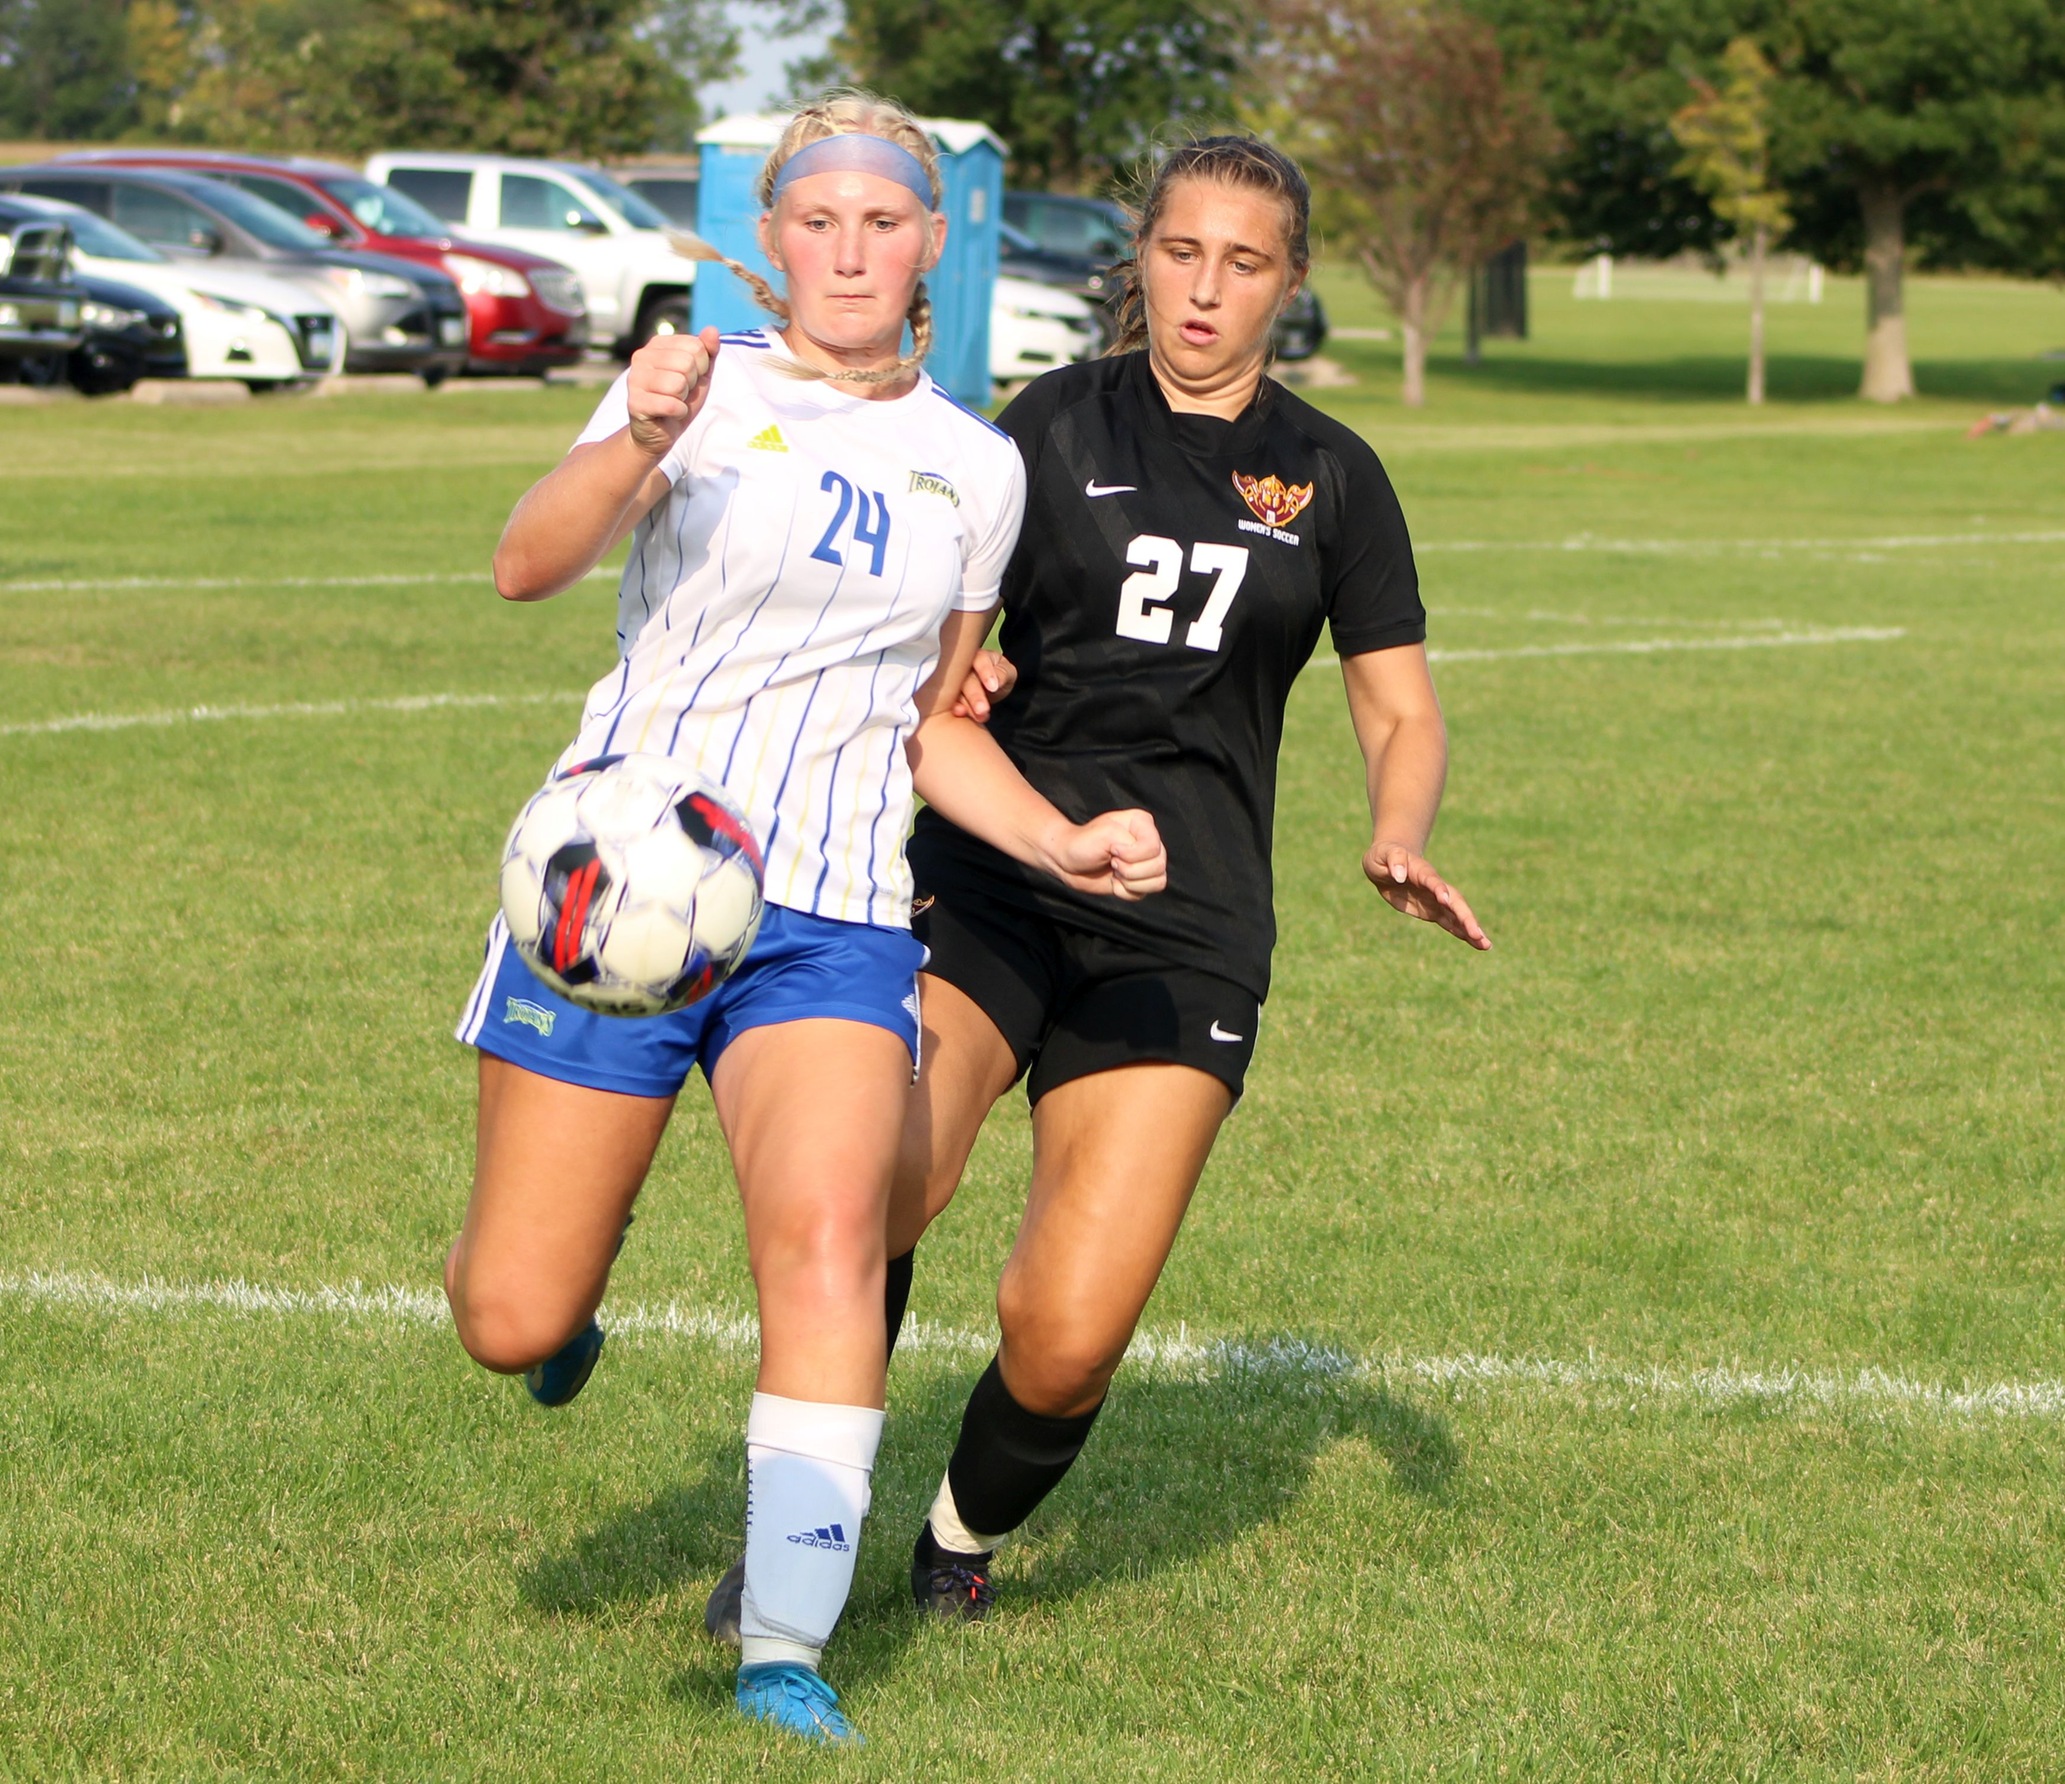 NIACC's Autumn Van Horns battles for the ball in Wednesday's match against Indian Hills.